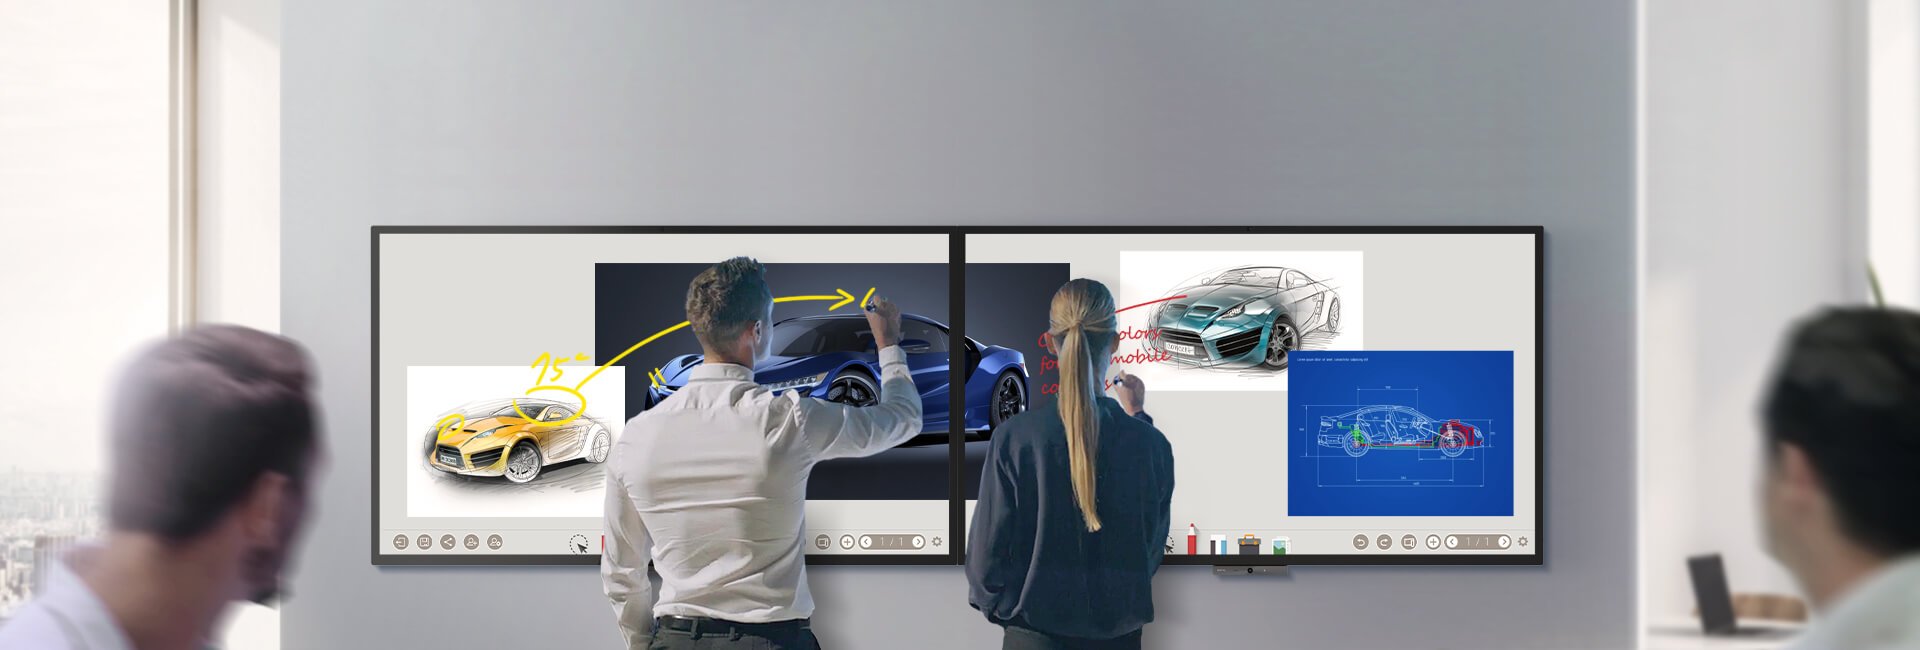 Visually communicate with collaboration tools provided by BenQ interactive displays 